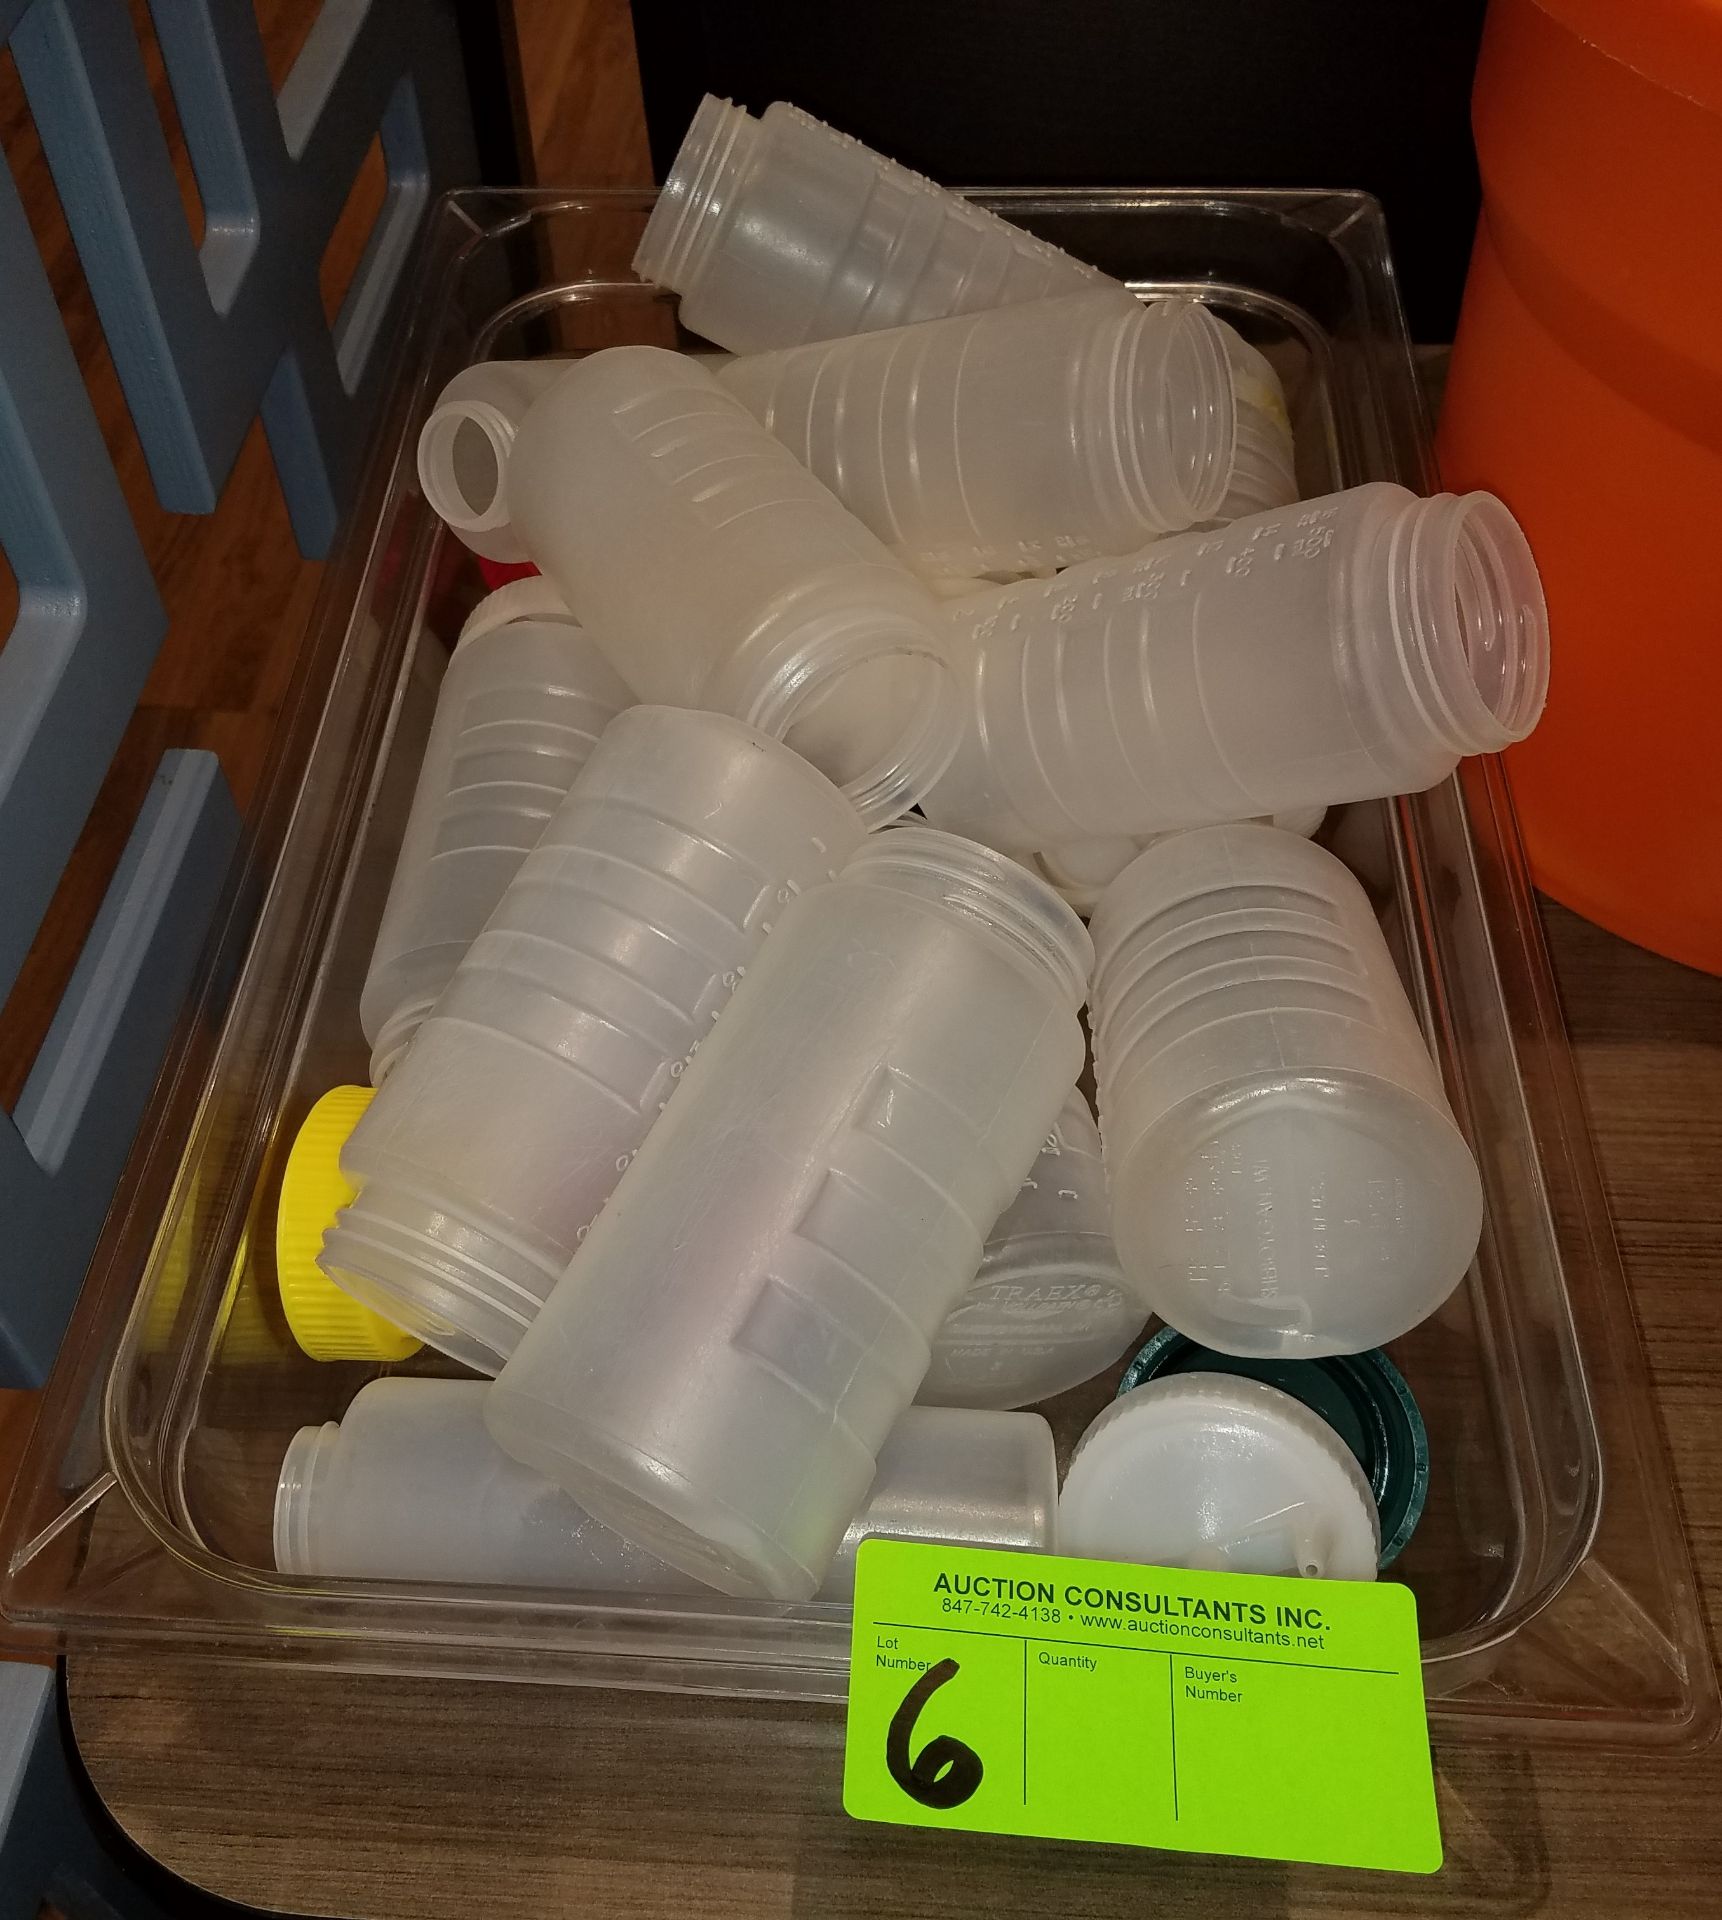 Lot of squeeze bottles with camwar